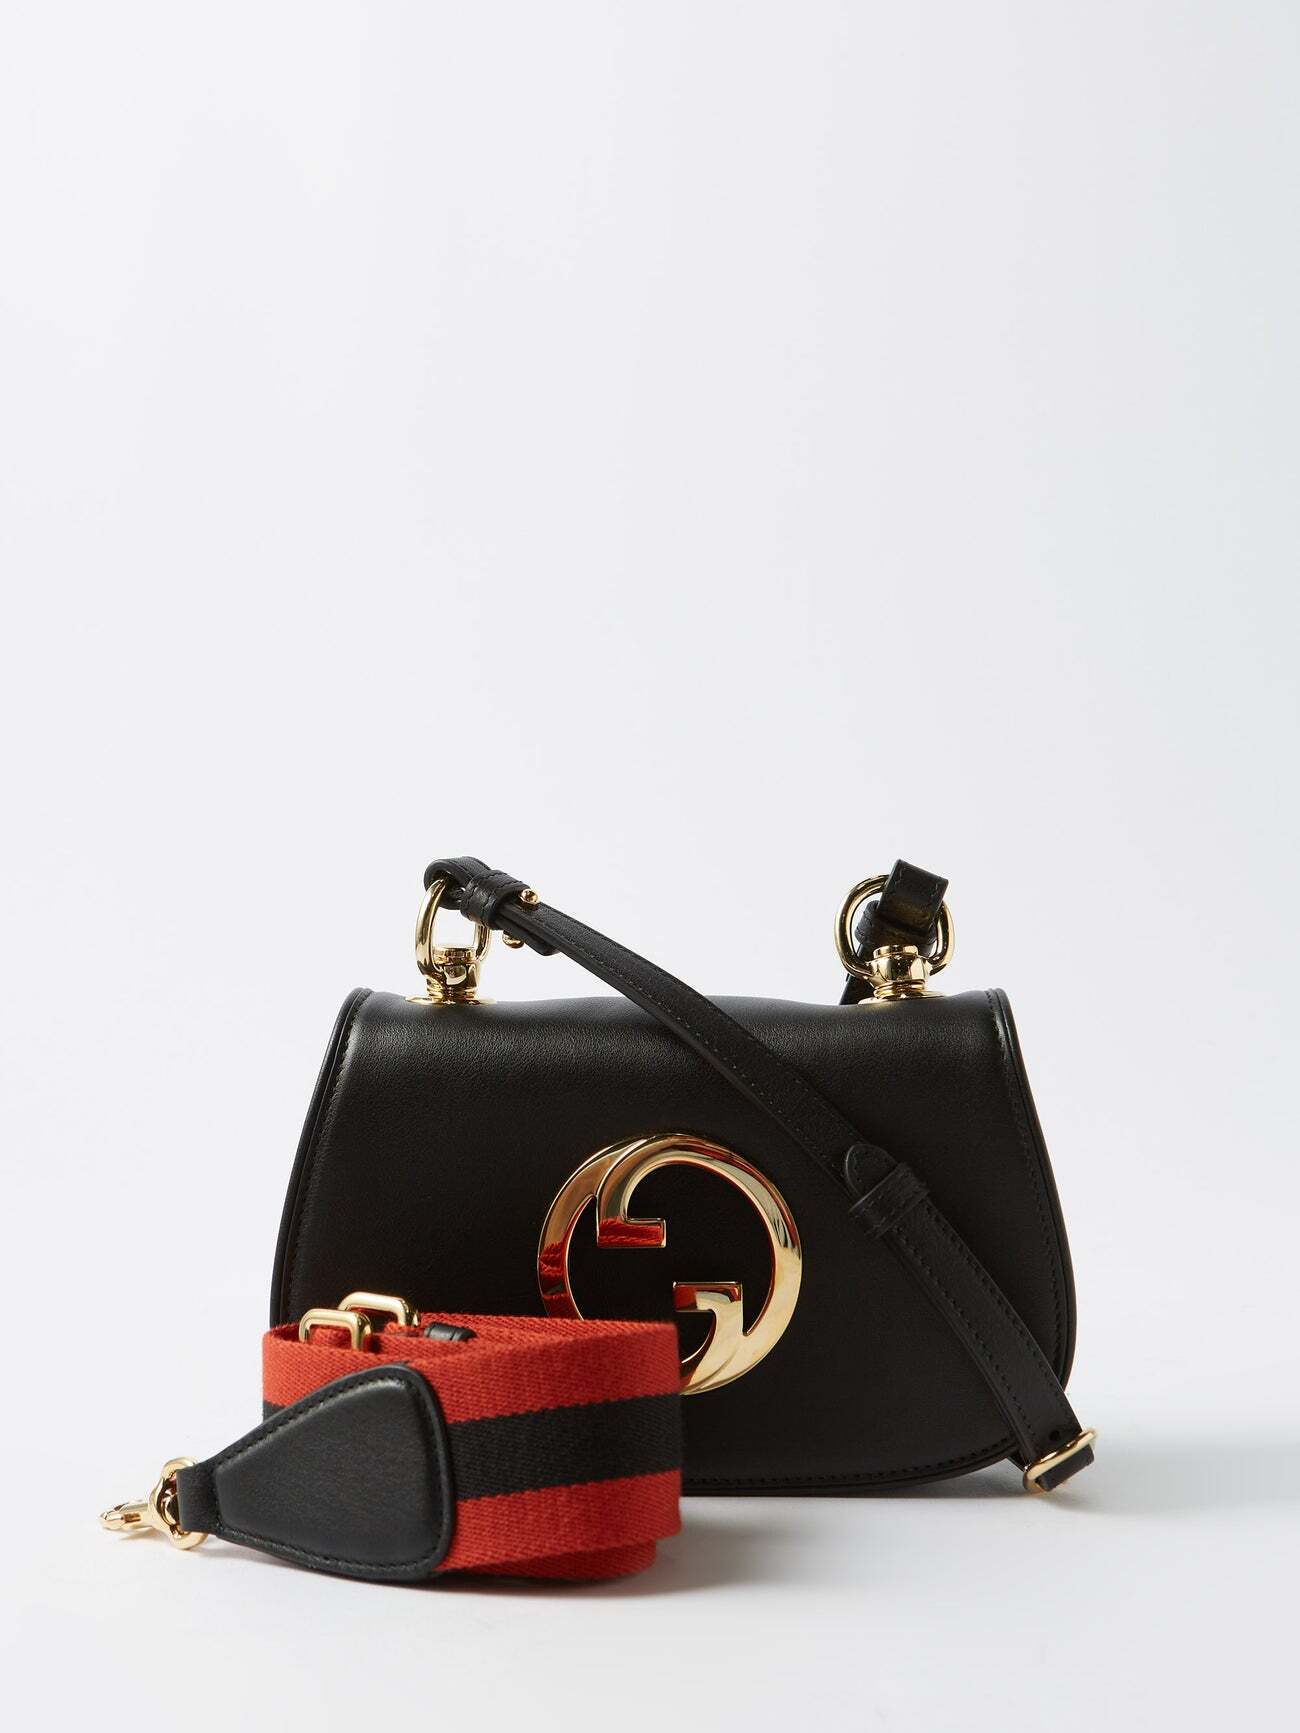 Gucci - New Blondie Small Web-stripe Leather Shoulder Bag - Womens - Black